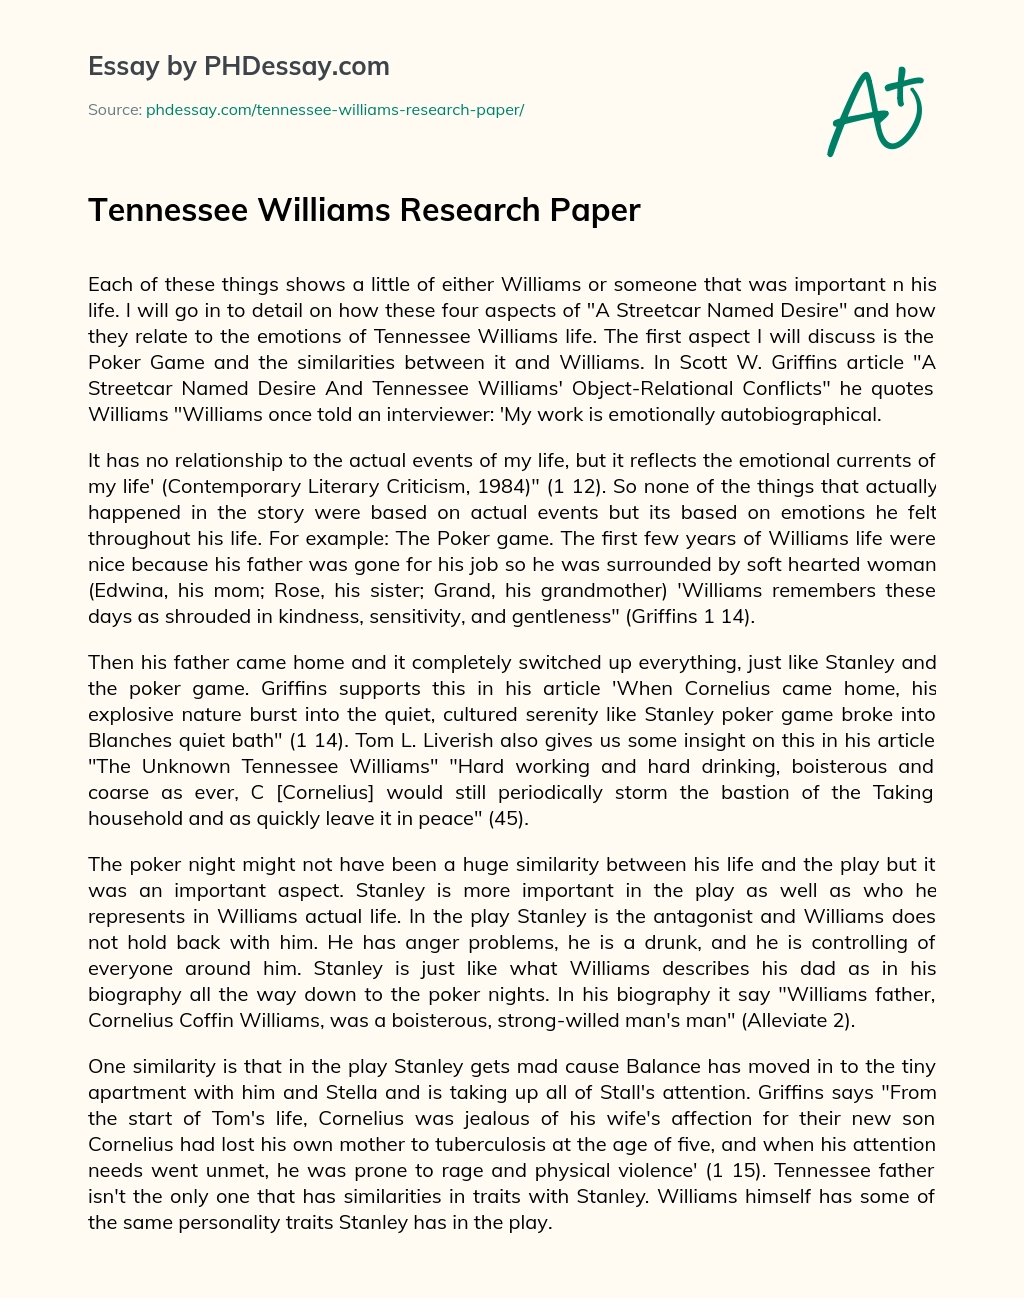 Tennessee Williams Research Paper essay